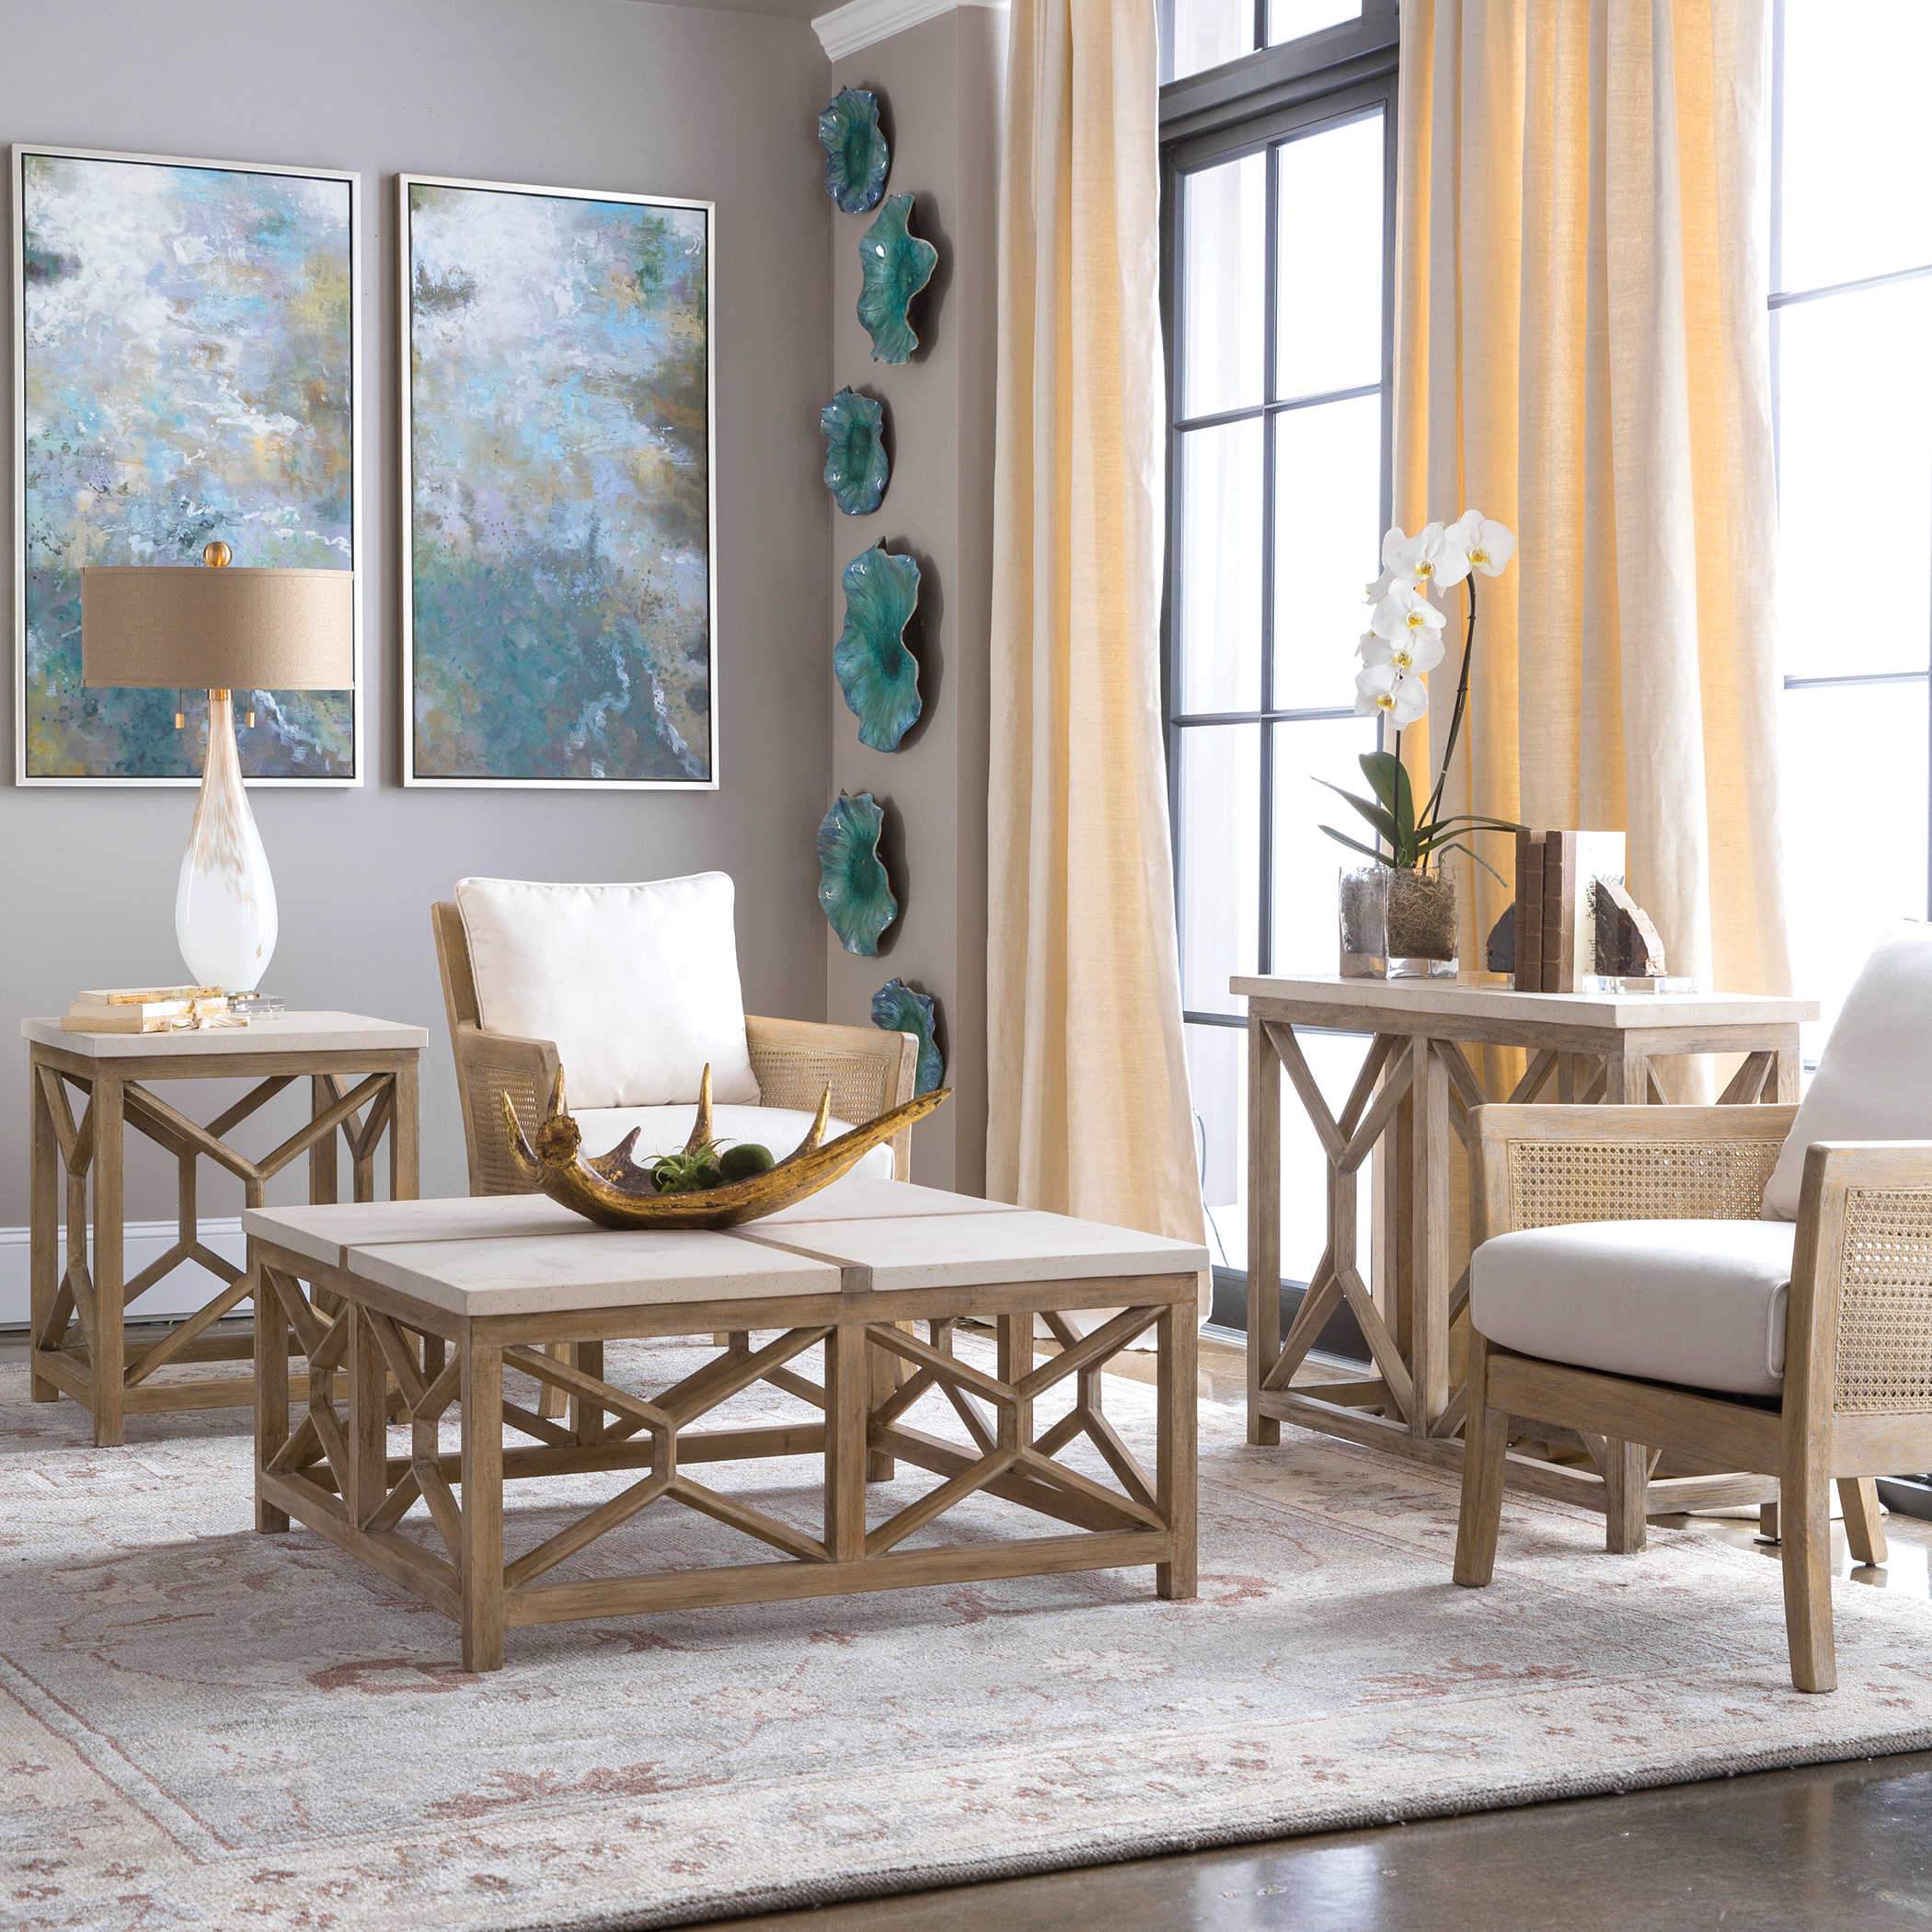 Roaring Hand Painted Canvas Uttermost